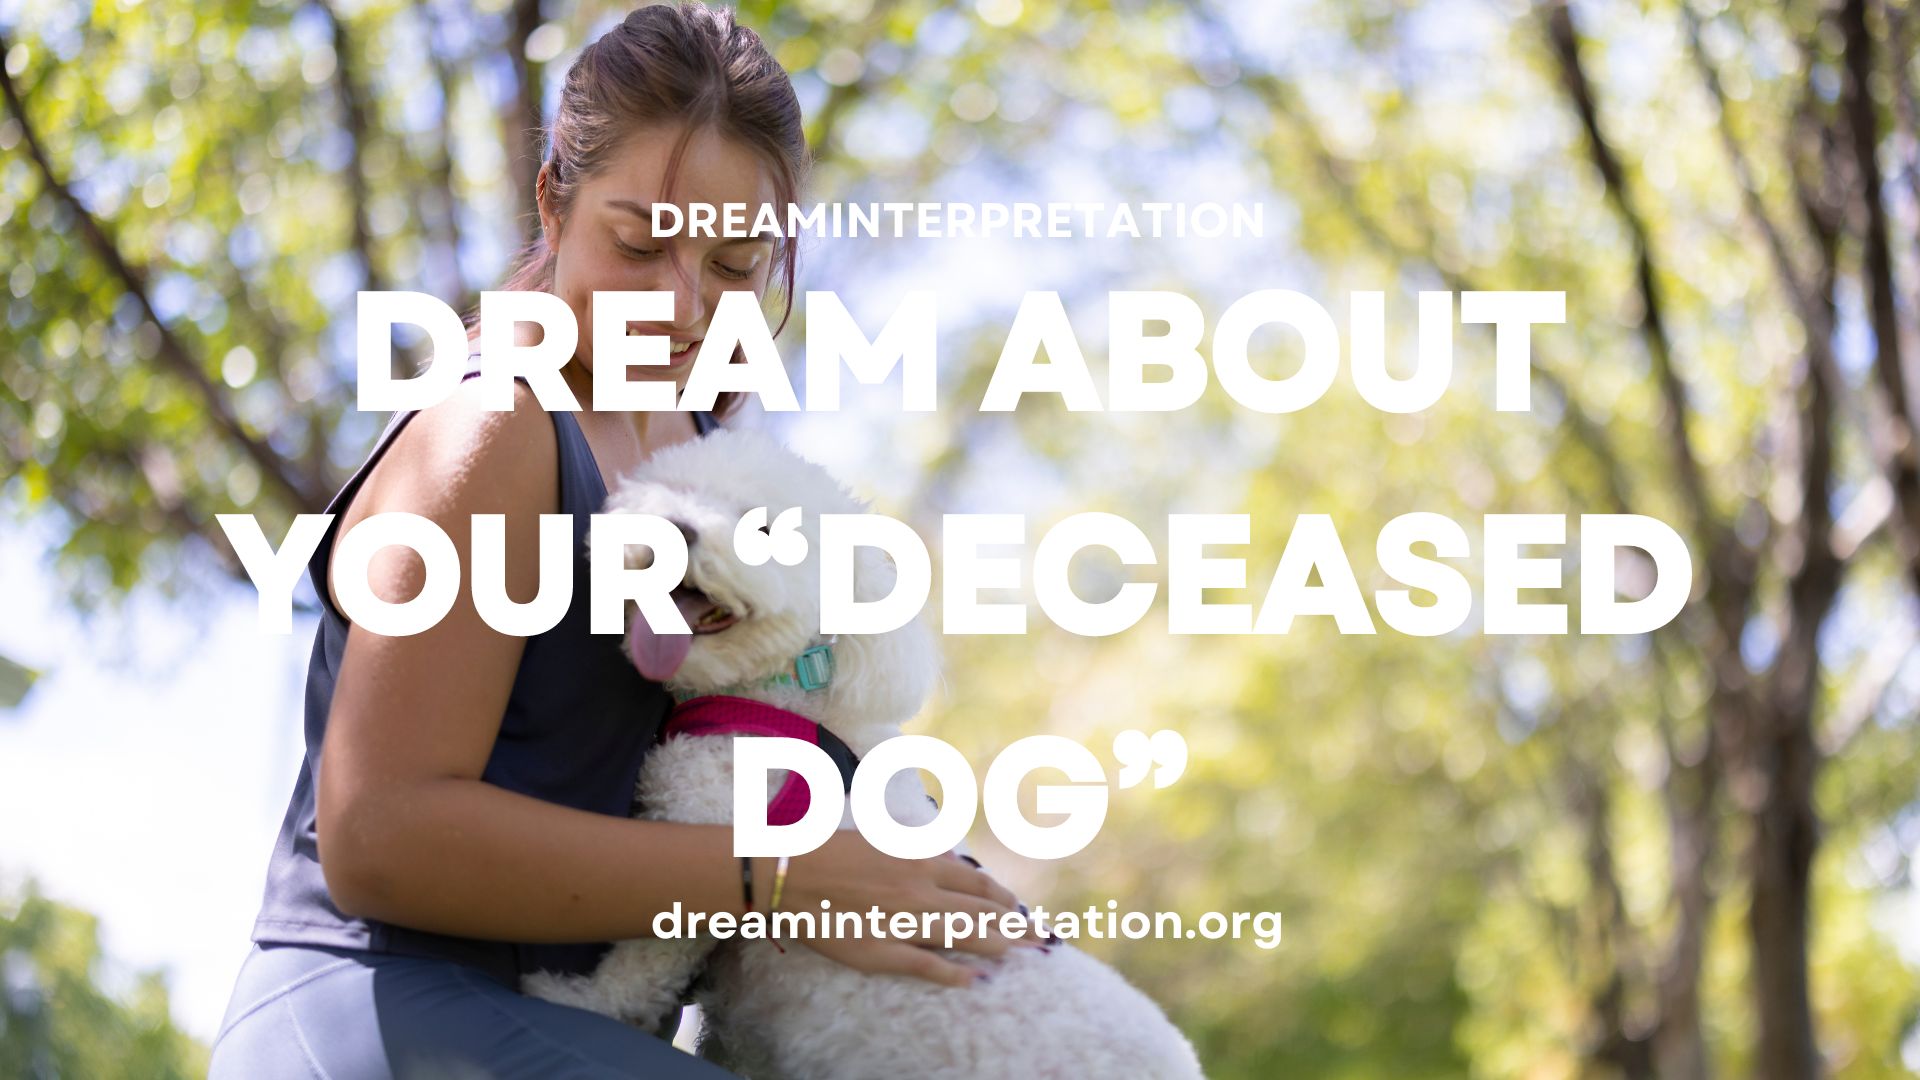 Dream About Your “Deceased Dog”